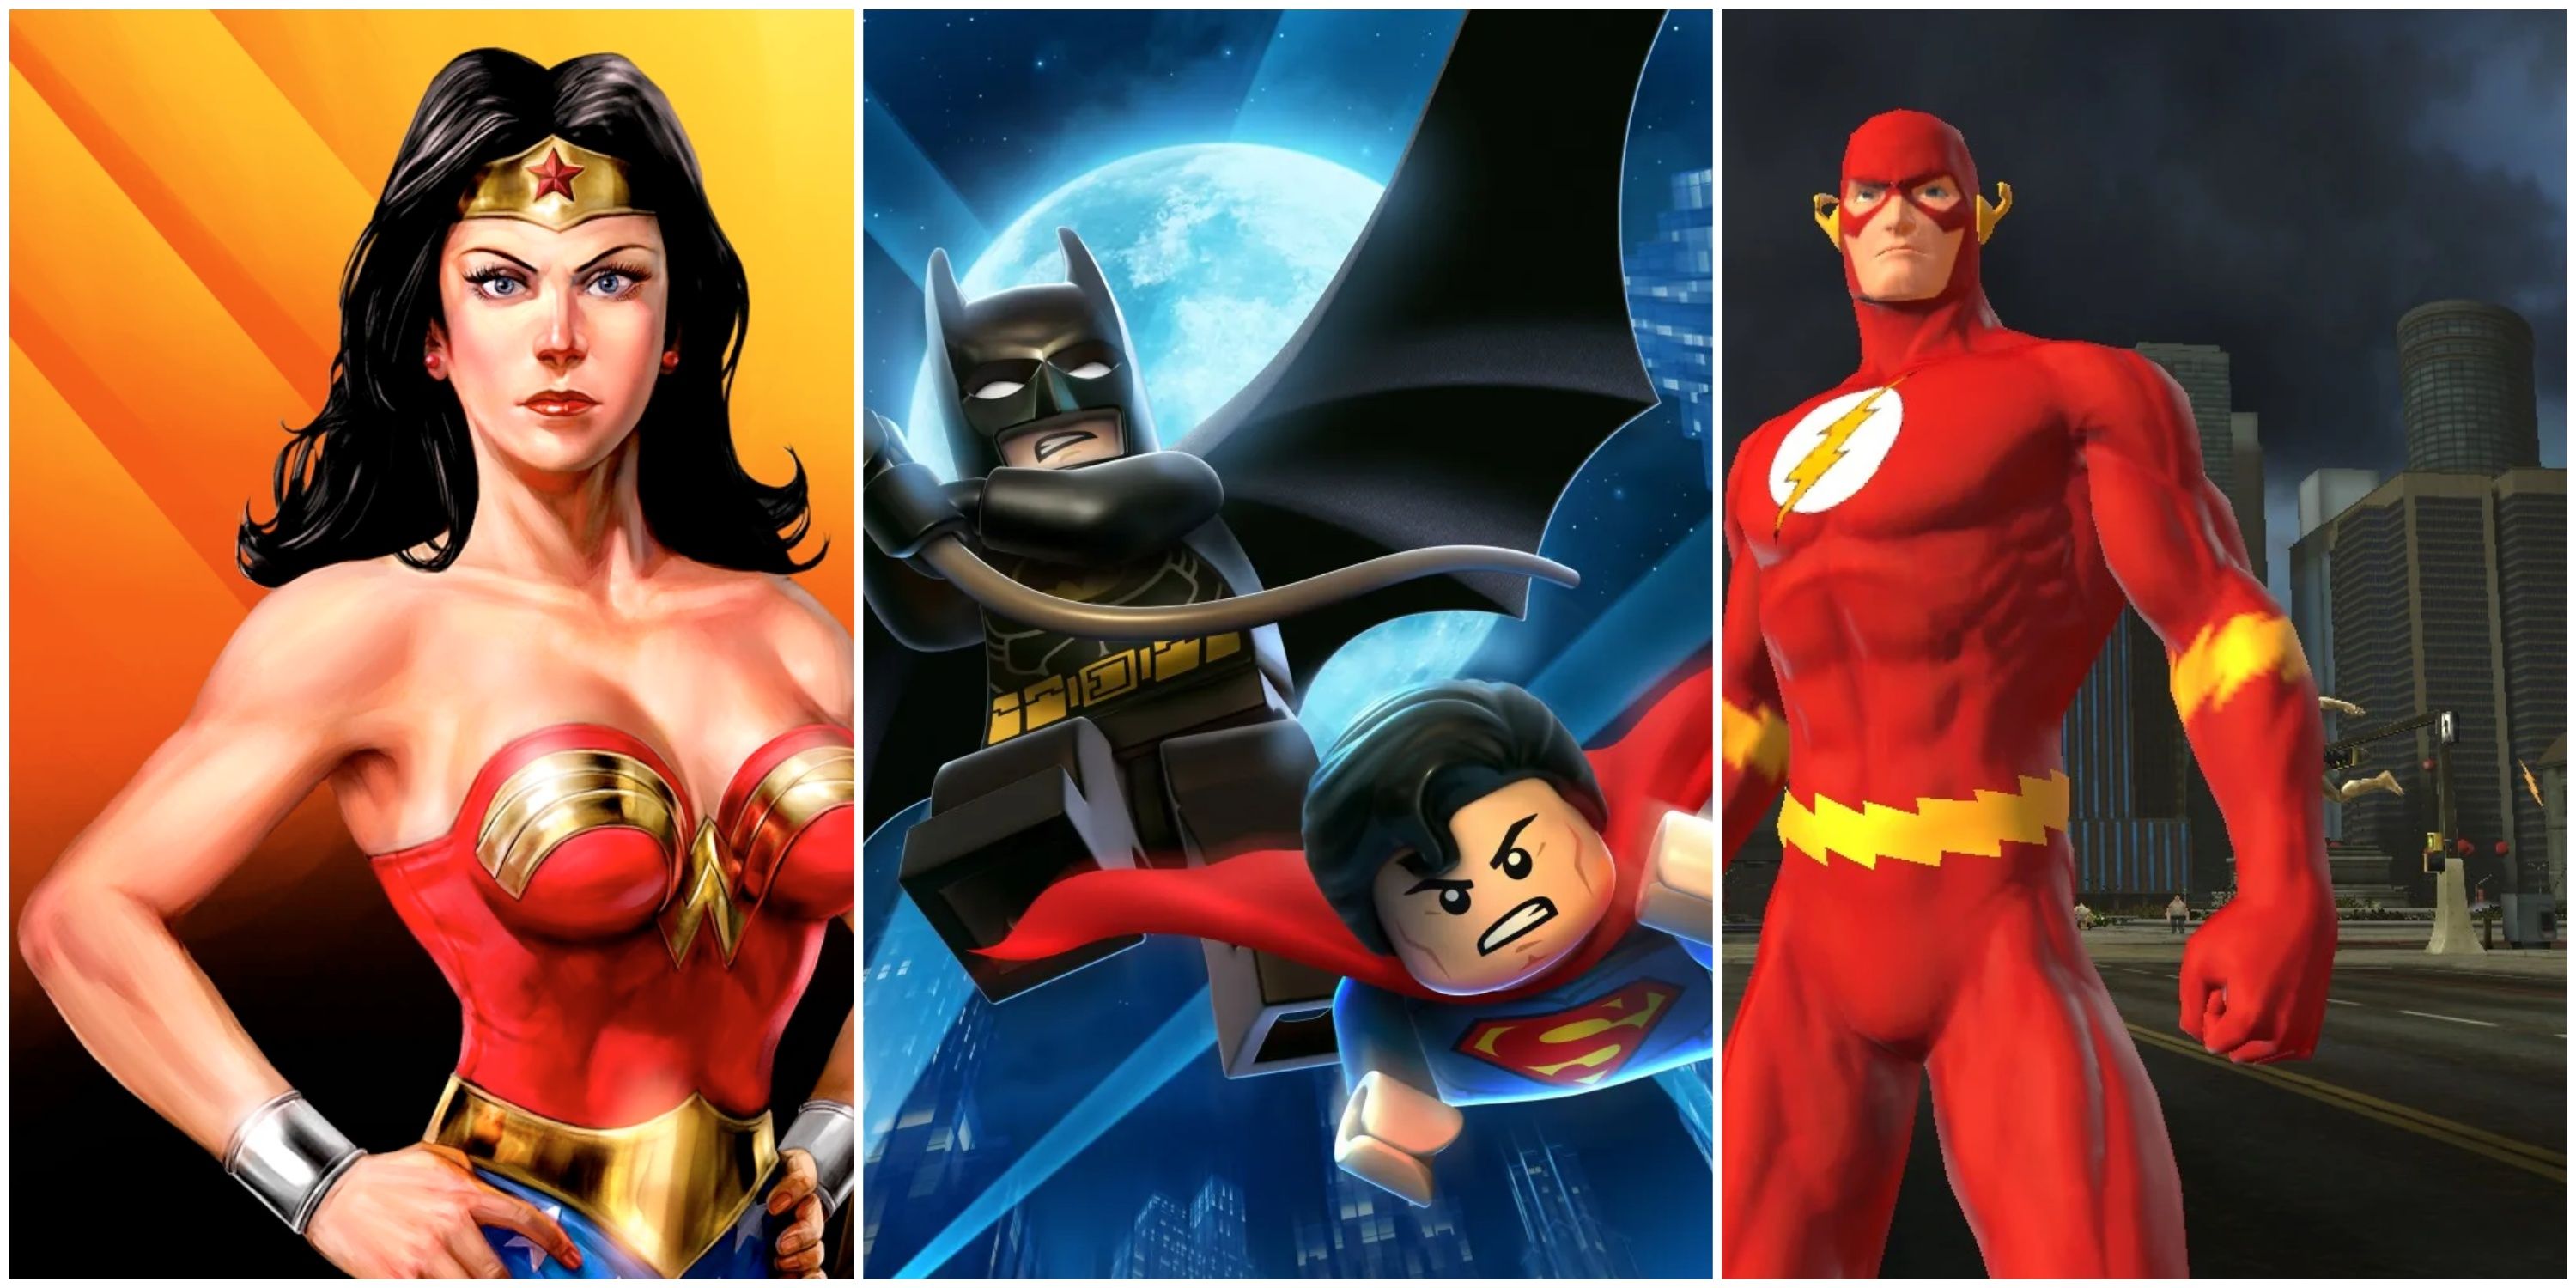 DC Games Most Faithful To The Comics